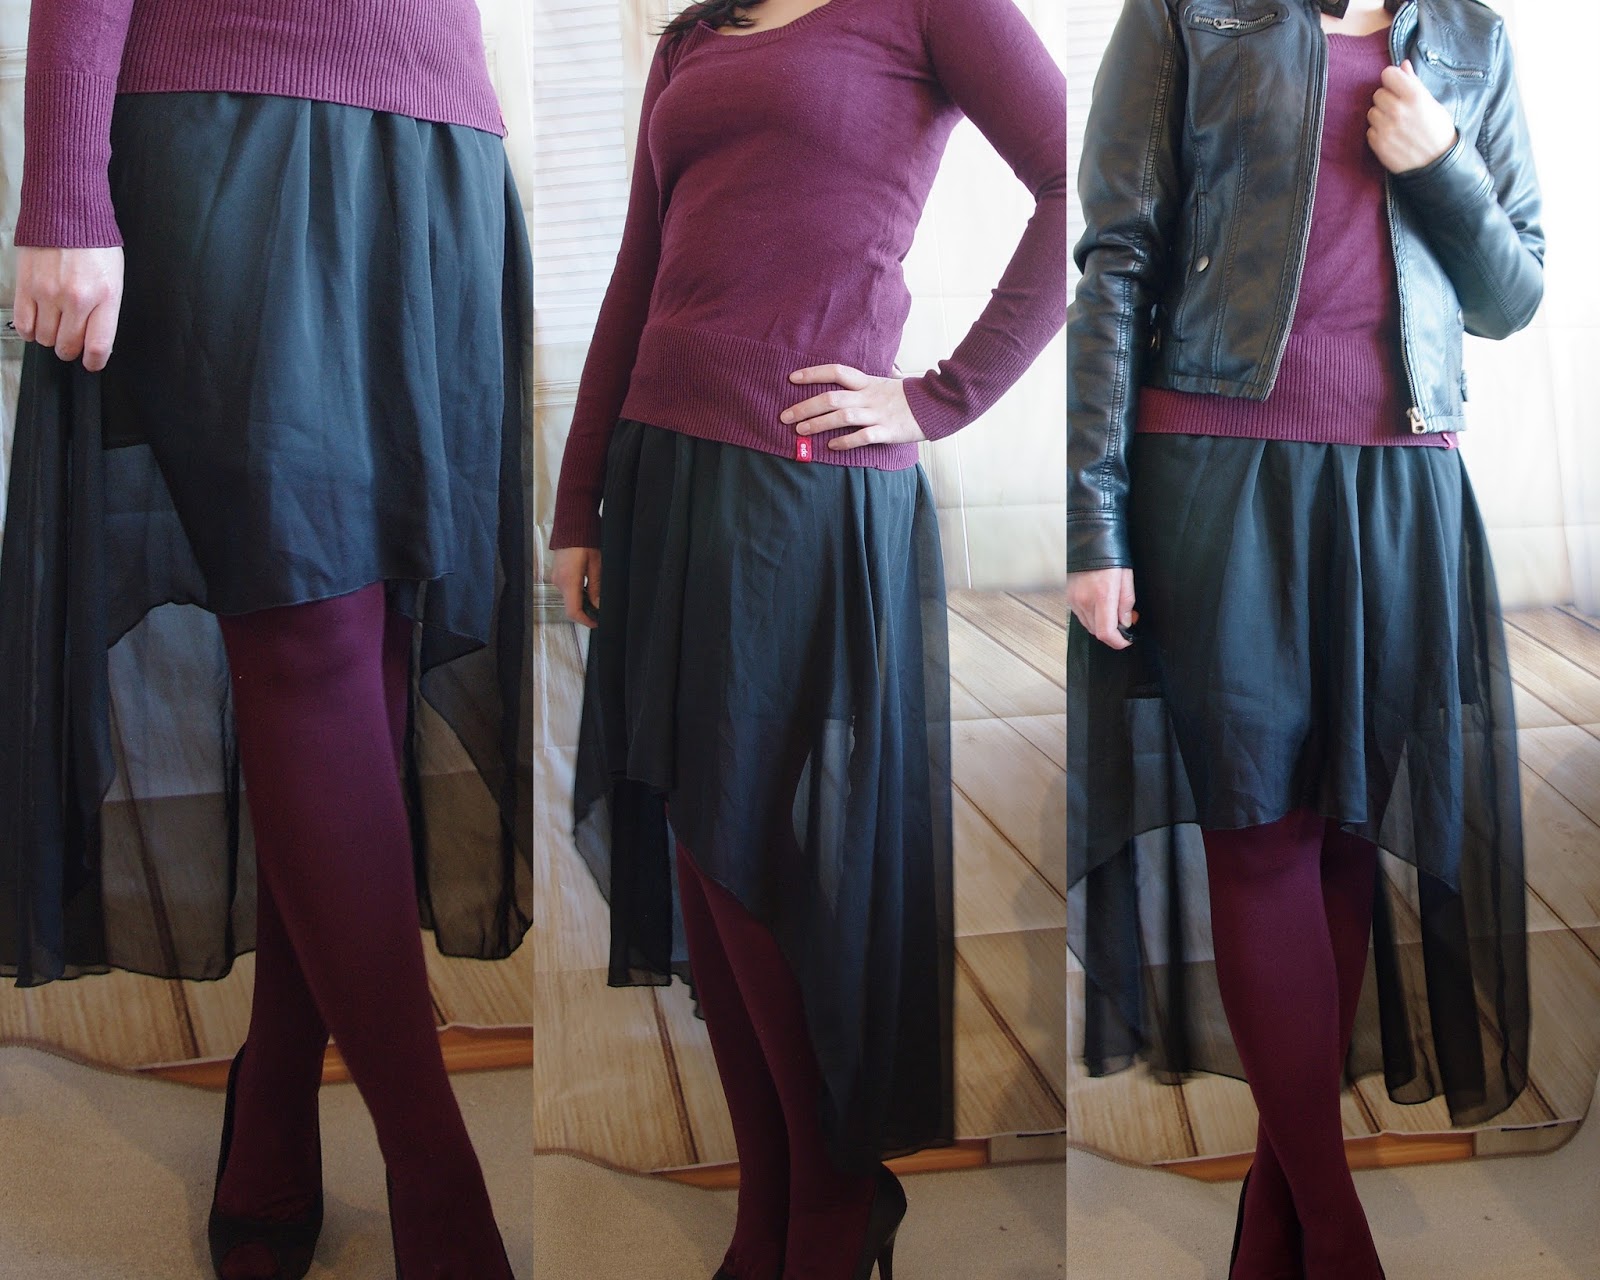 Vokuhila Skirt, colored tights, sweater and leather jacket Outfit